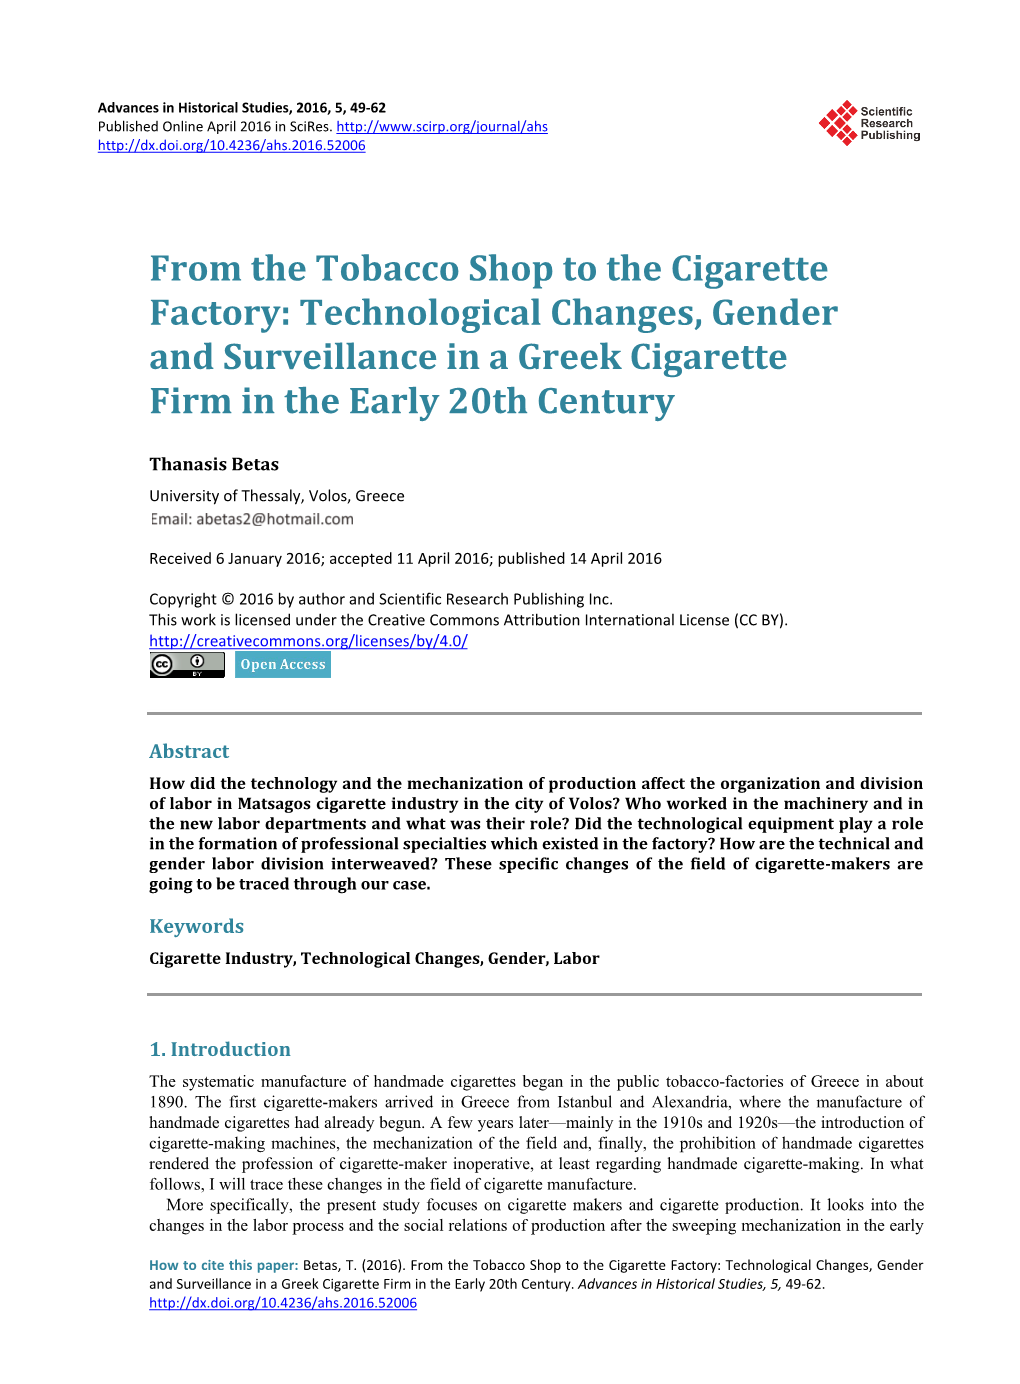 Technological Changes, Gender and Surveillance in a Greek Cigarette Firm in the Early 20Th Century